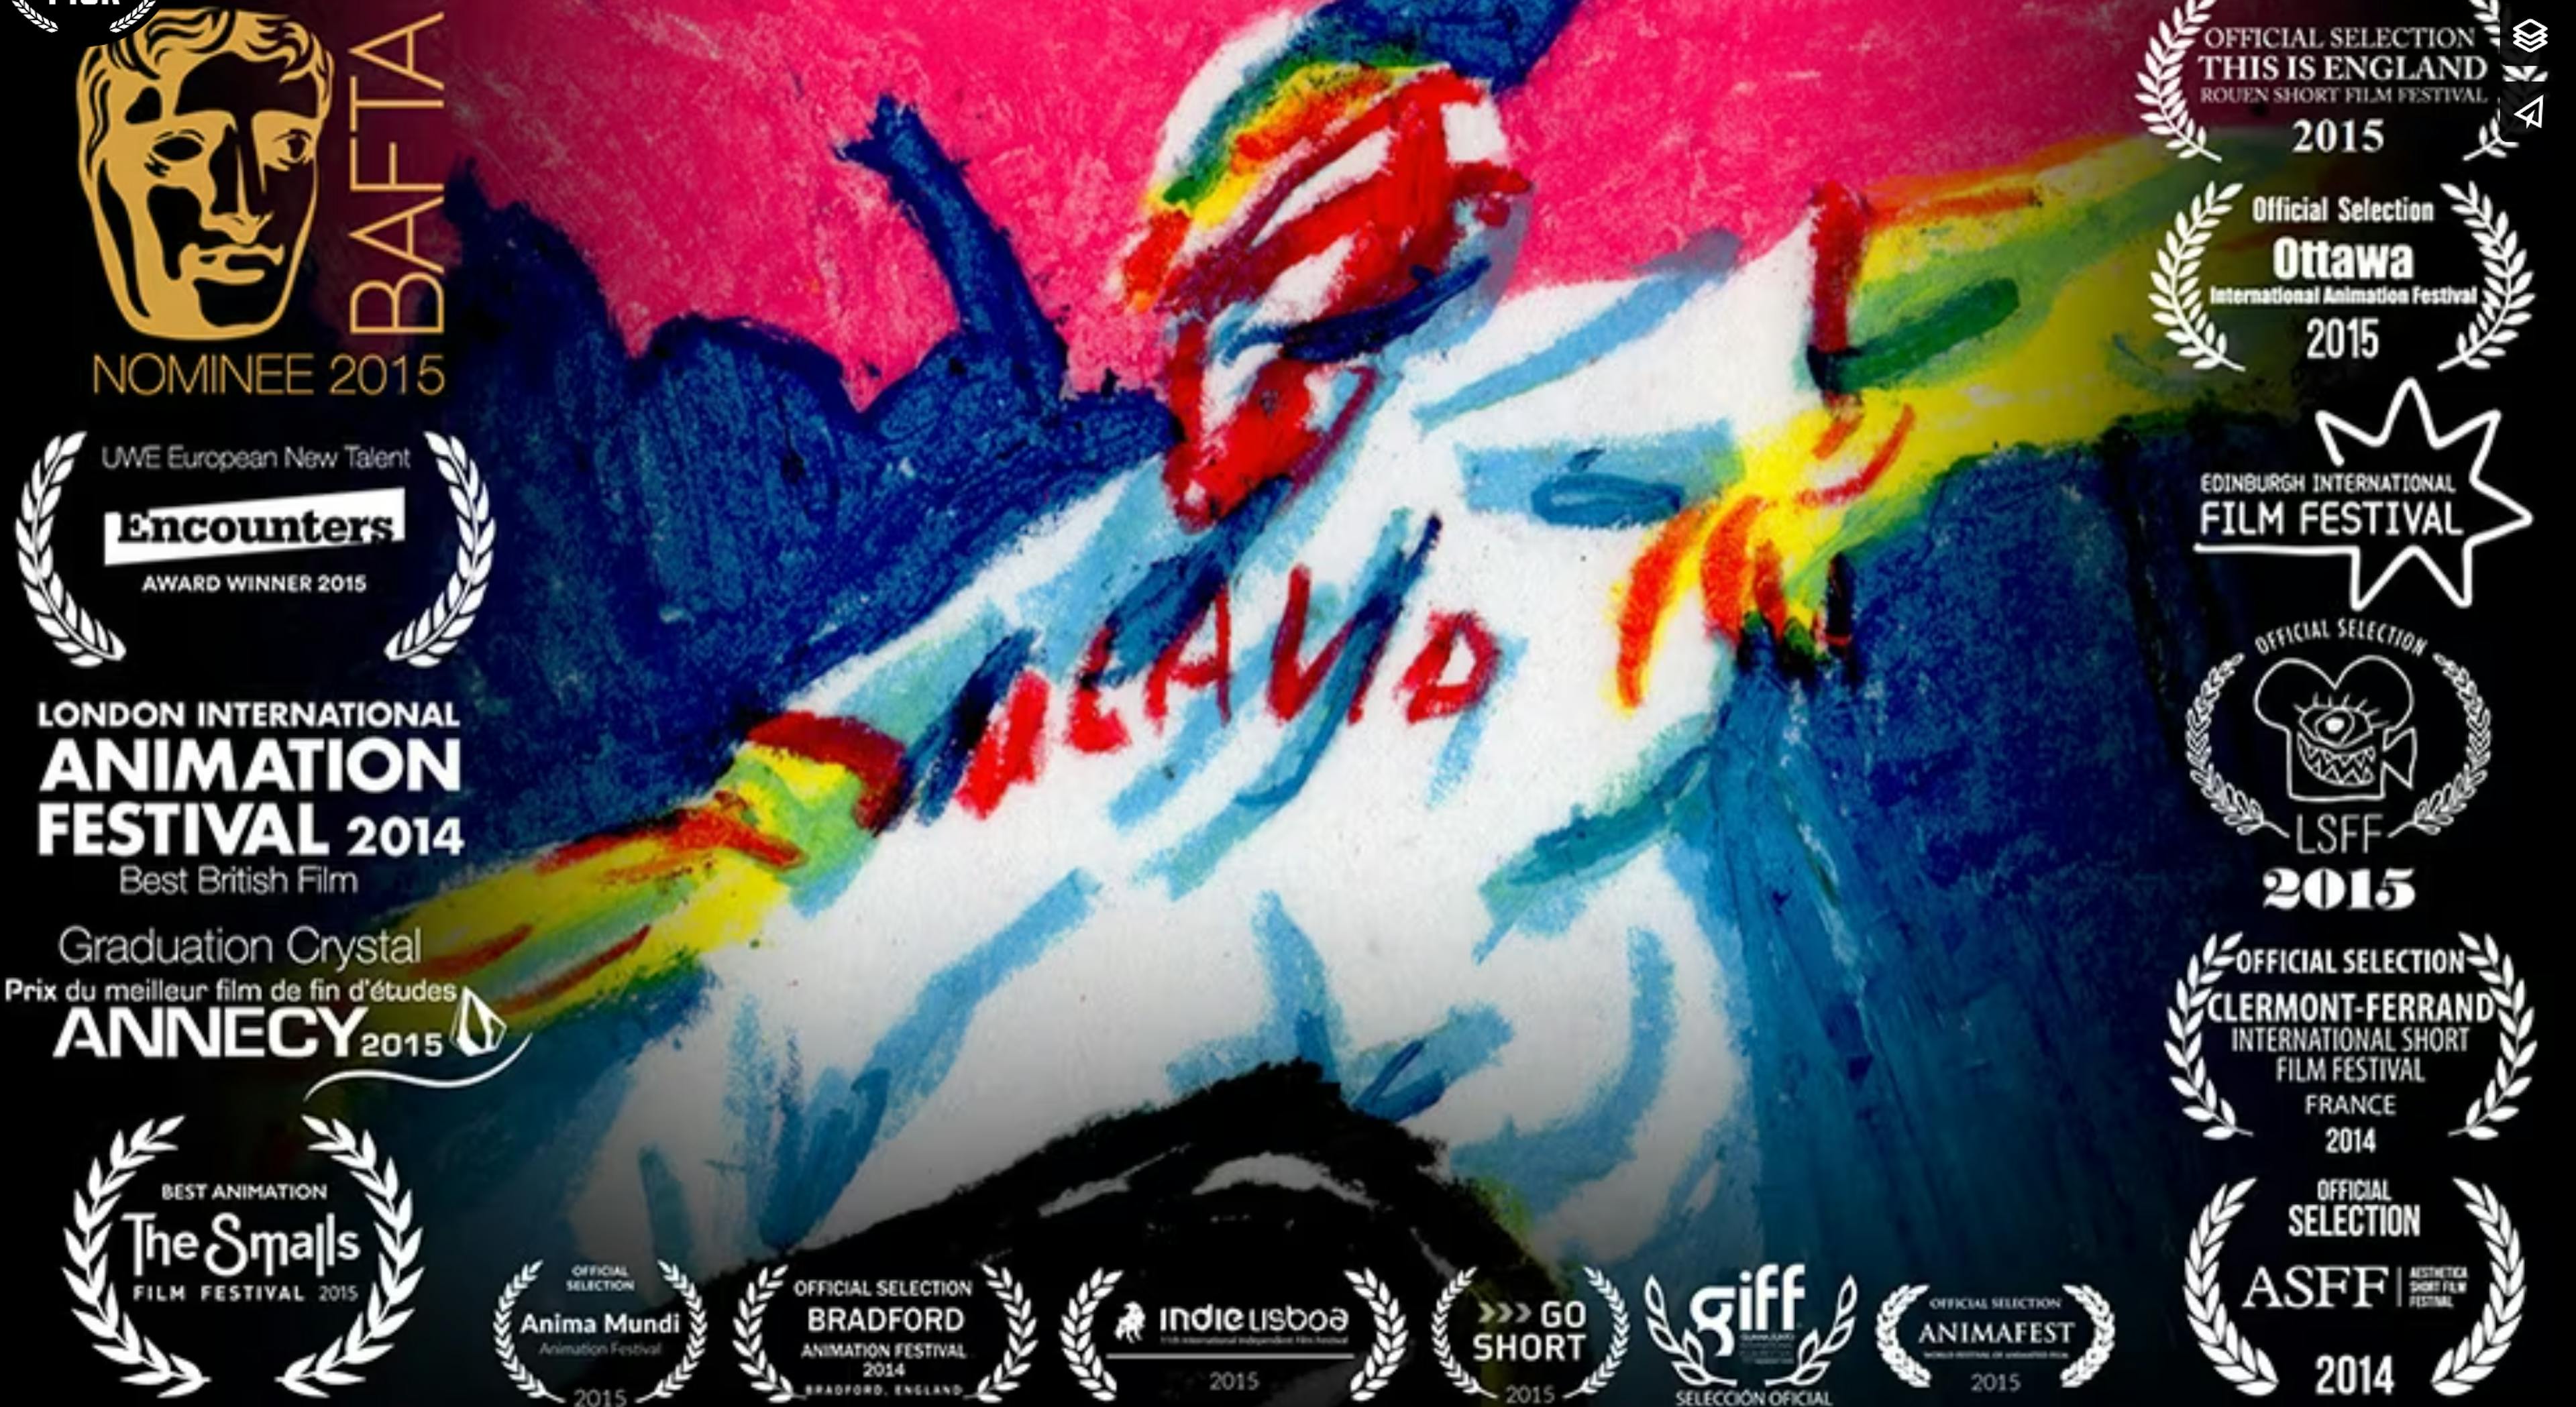 image of "My dad" (2014) and the many laurels it has been awarded. Image is of a character drawn in vibrant pastels - wearing a blue, red and white helmet, a white tshirt, and arms with bright yellow colour. 